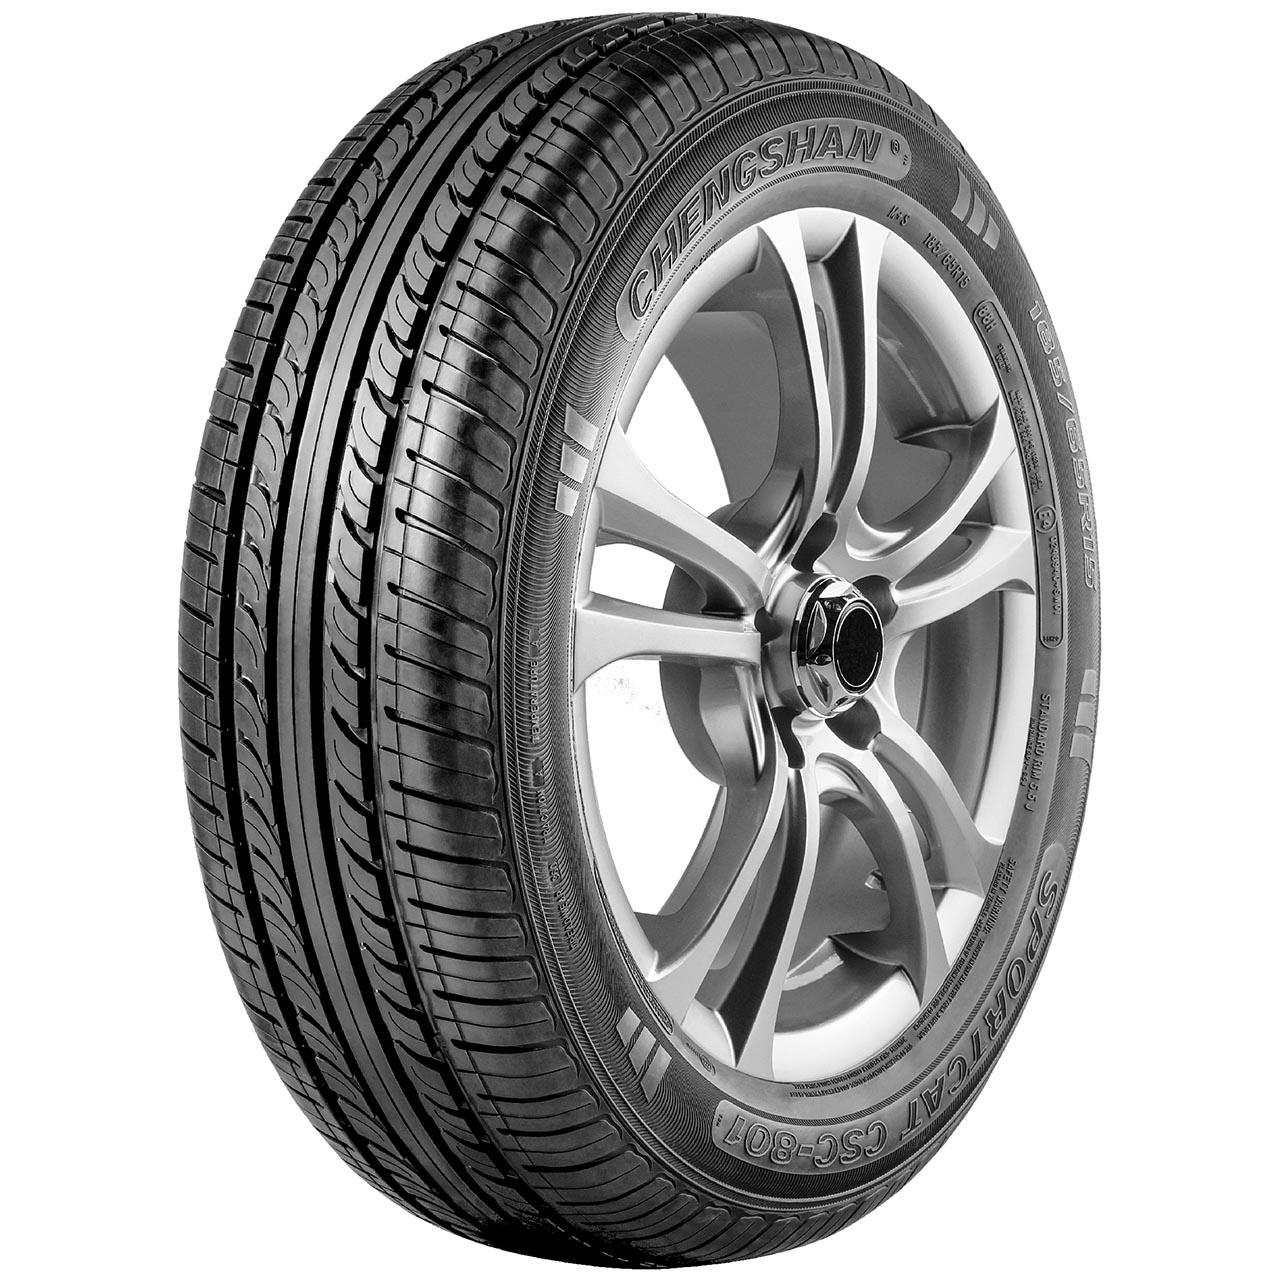 CHENGSHAN SPORTCAT CSC-801 165/70R14 81T BSW